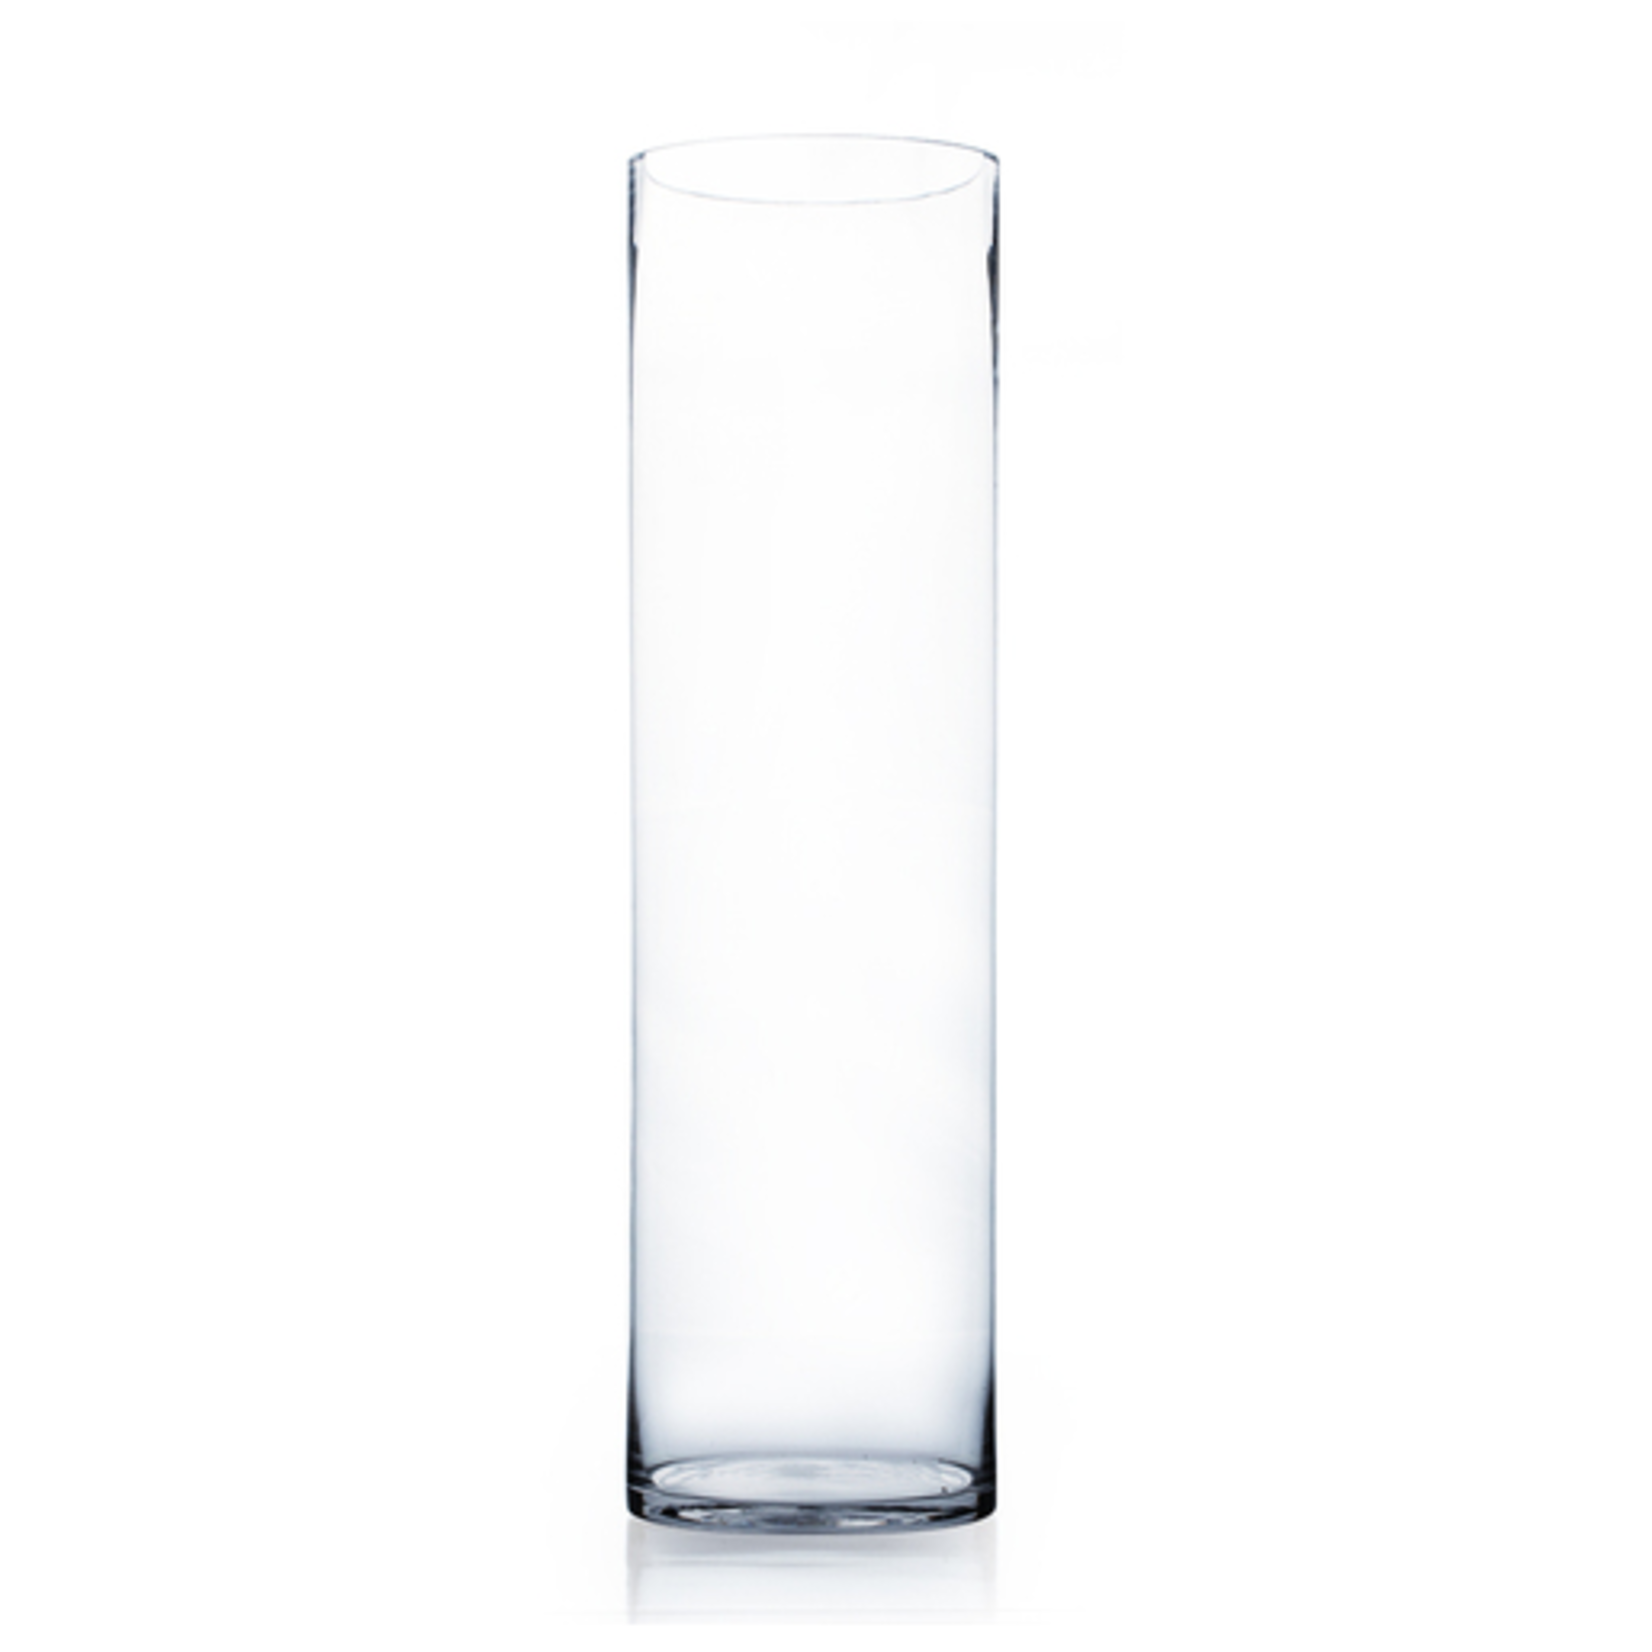 28"H X 8" CLEAR GLASS CYLINDER VASE